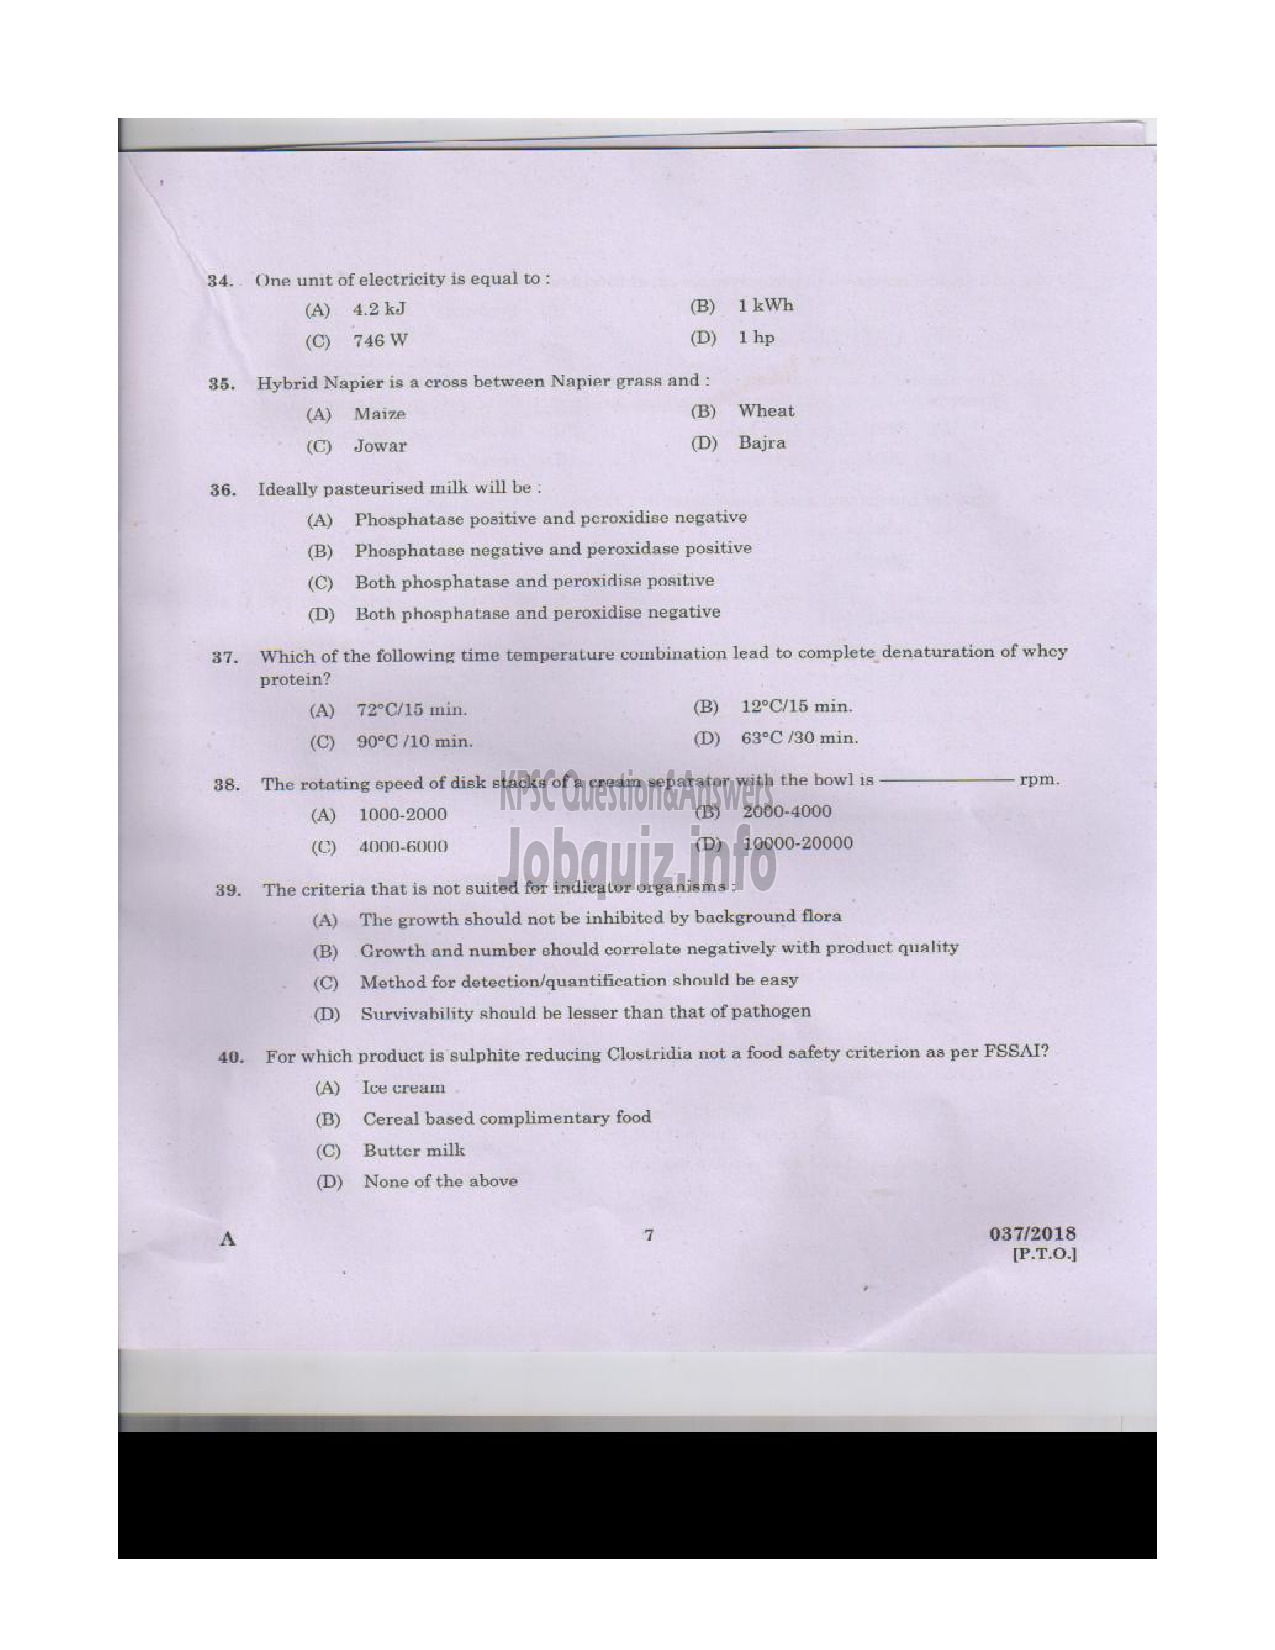 Kerala PSC Question Paper - VOCATIONAL INSTRUCTOR IN DAIRYING MILK PRODUCTS VOCATIONAL HIGHER SECONDARY EDUCATION-6